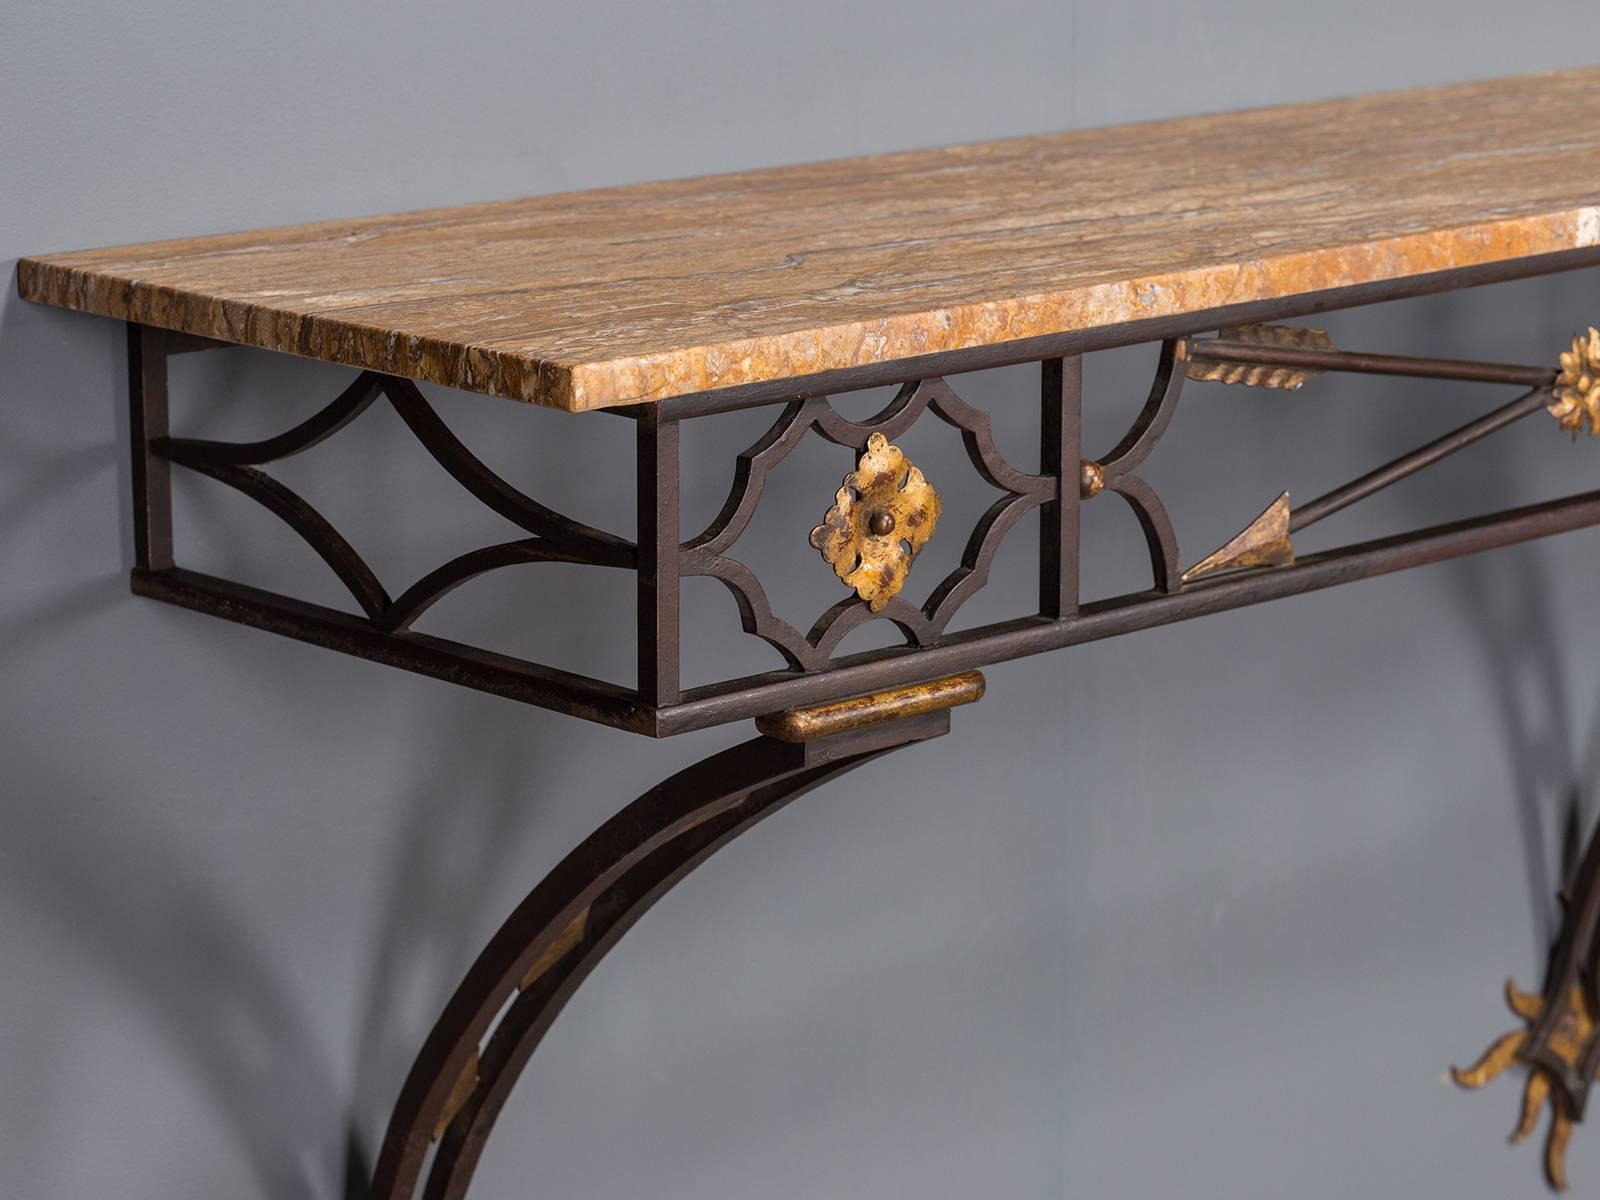 Receive our new selections direct from 1stdibs by email each week. Please click Follow Dealer below and see them first!

The glamour of French Art Deco is embodied in this vintage forged iron console table, circa 1930 with gilded highlights and a